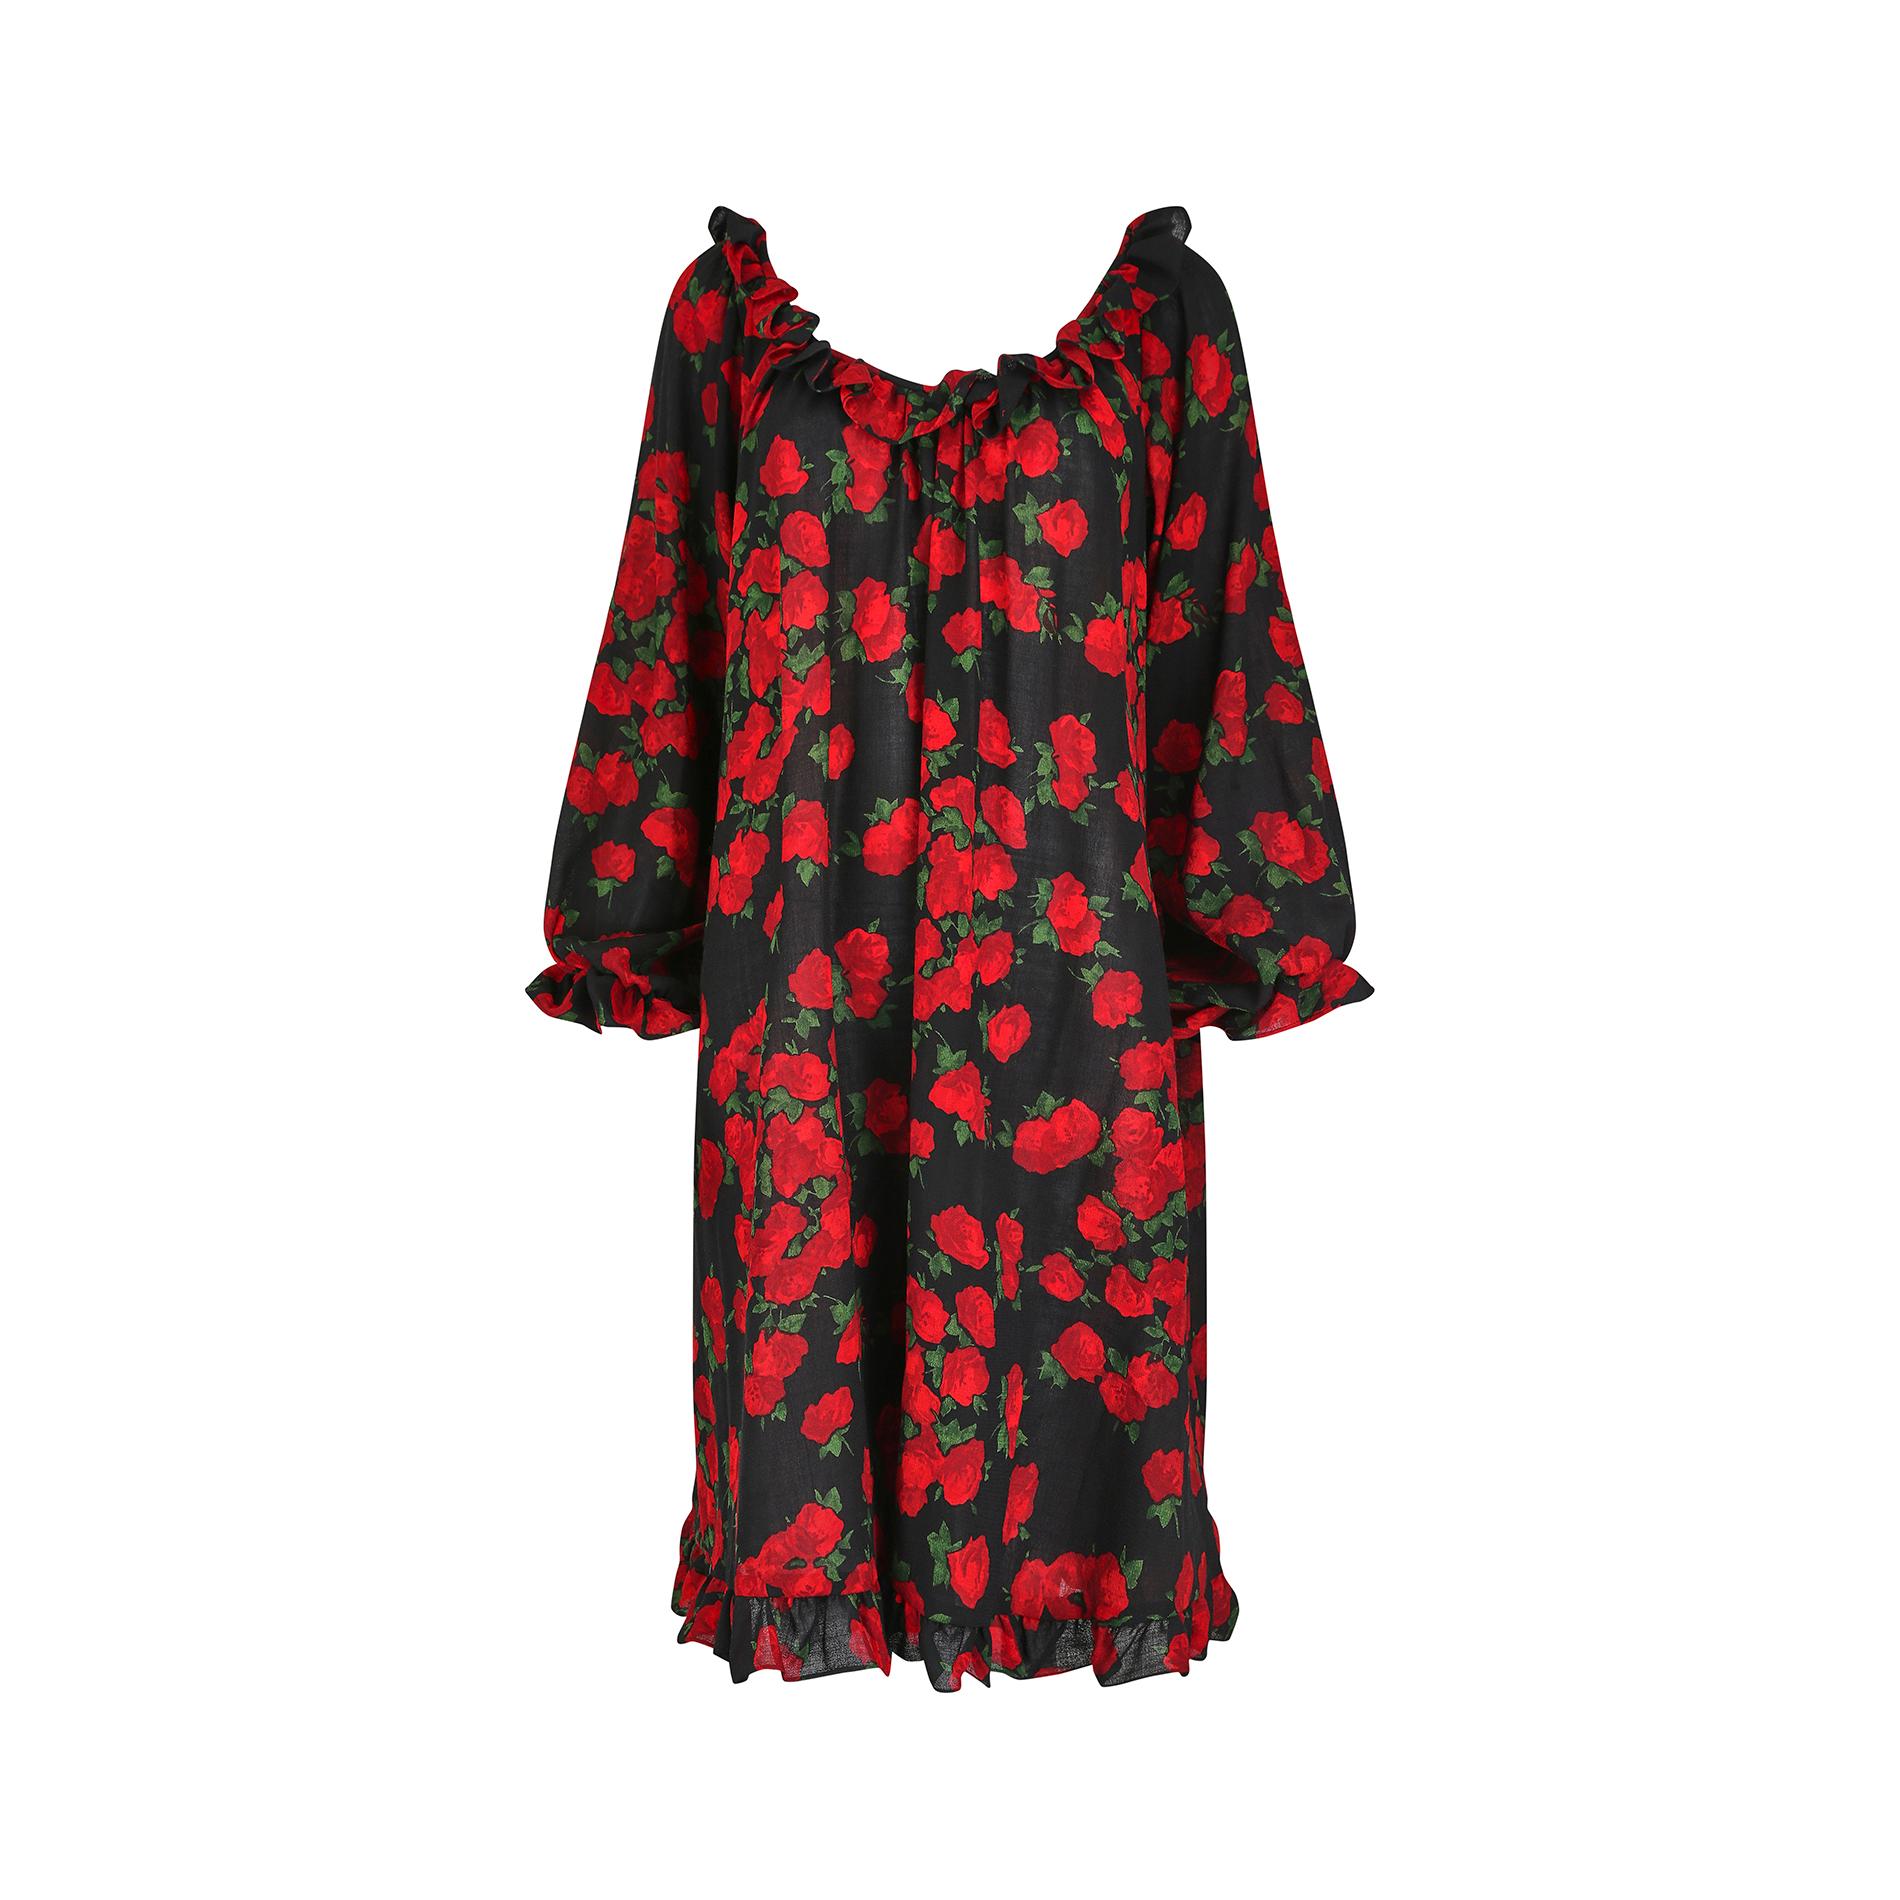 Yves Saint Laurent rose print dress from the Autumn/Winter 1994/95 collection. Made in France, and with the 'Rive Gauche' ready to wear label, it features a wide ruffled neckline, which can sit both on and off the shoulder for a romantic, almost